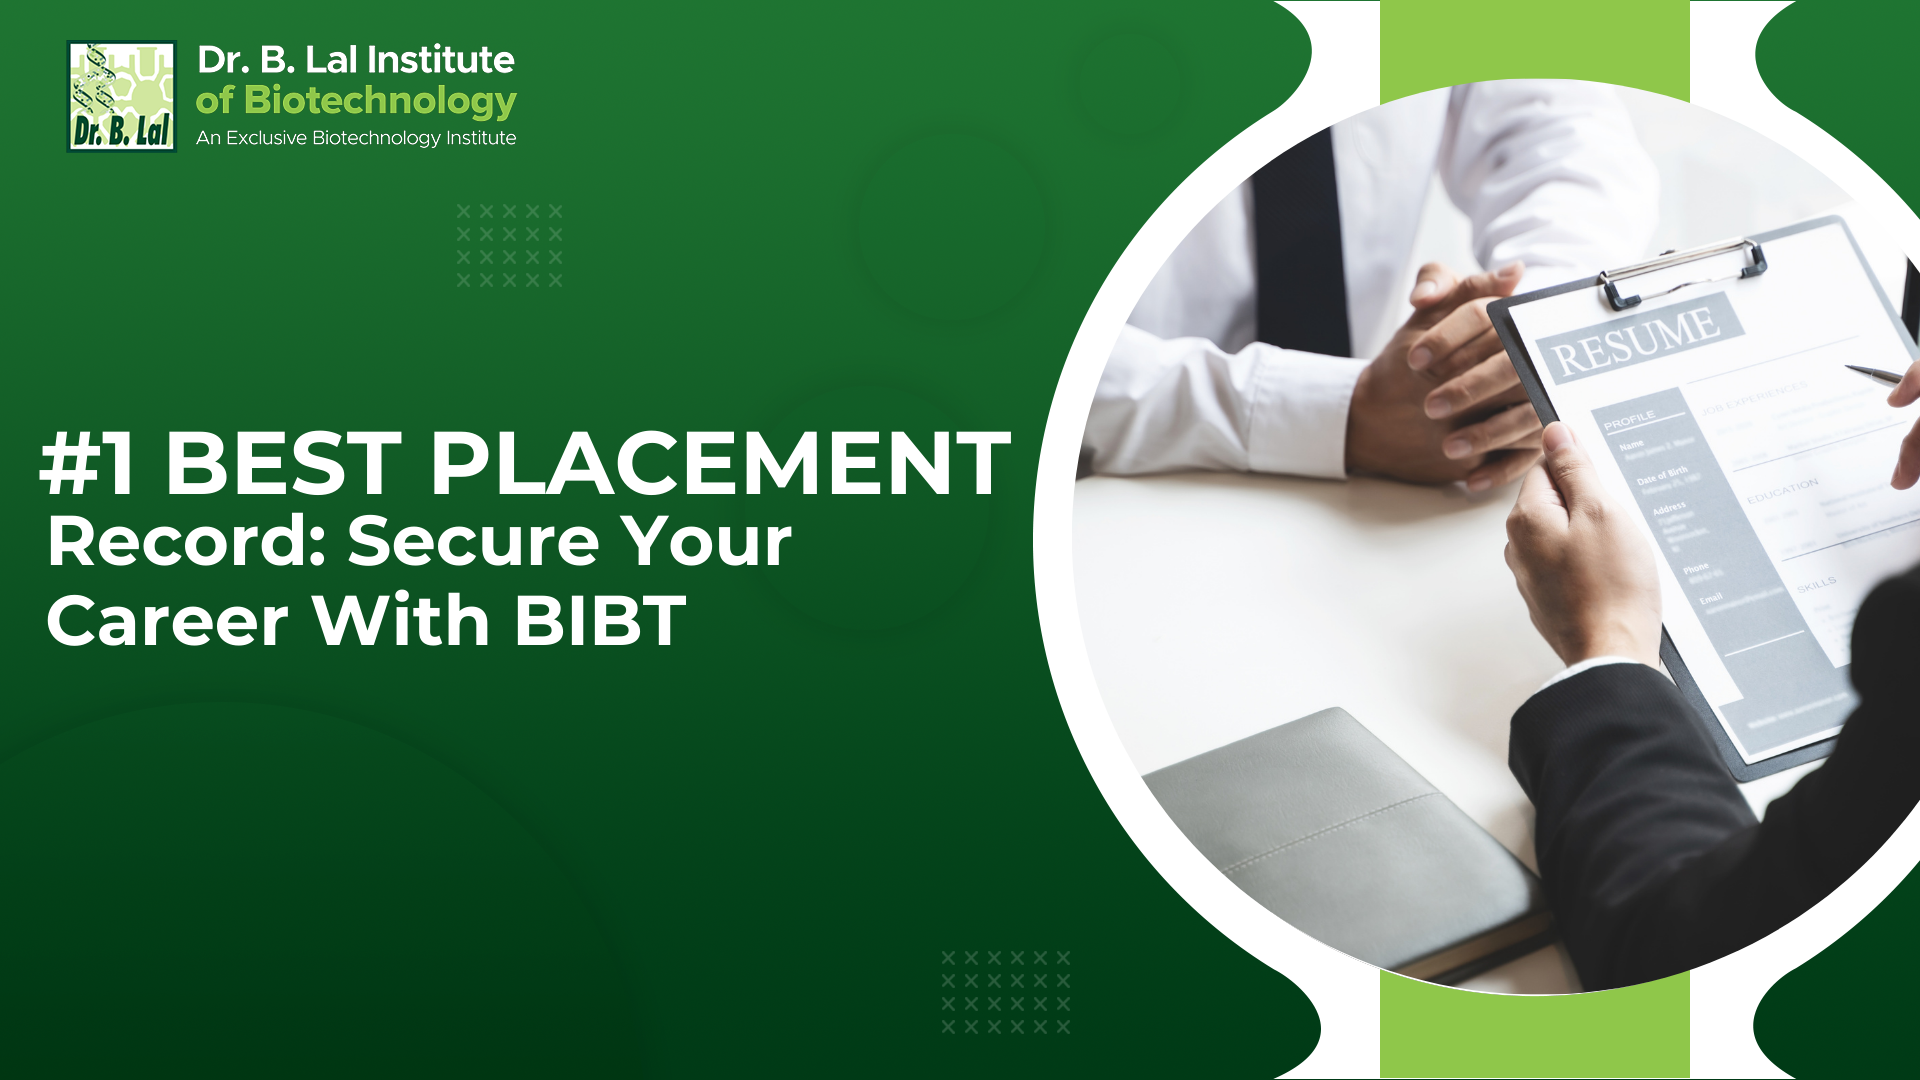 #1 Best Placement Record: Secure Your Career With BIBT